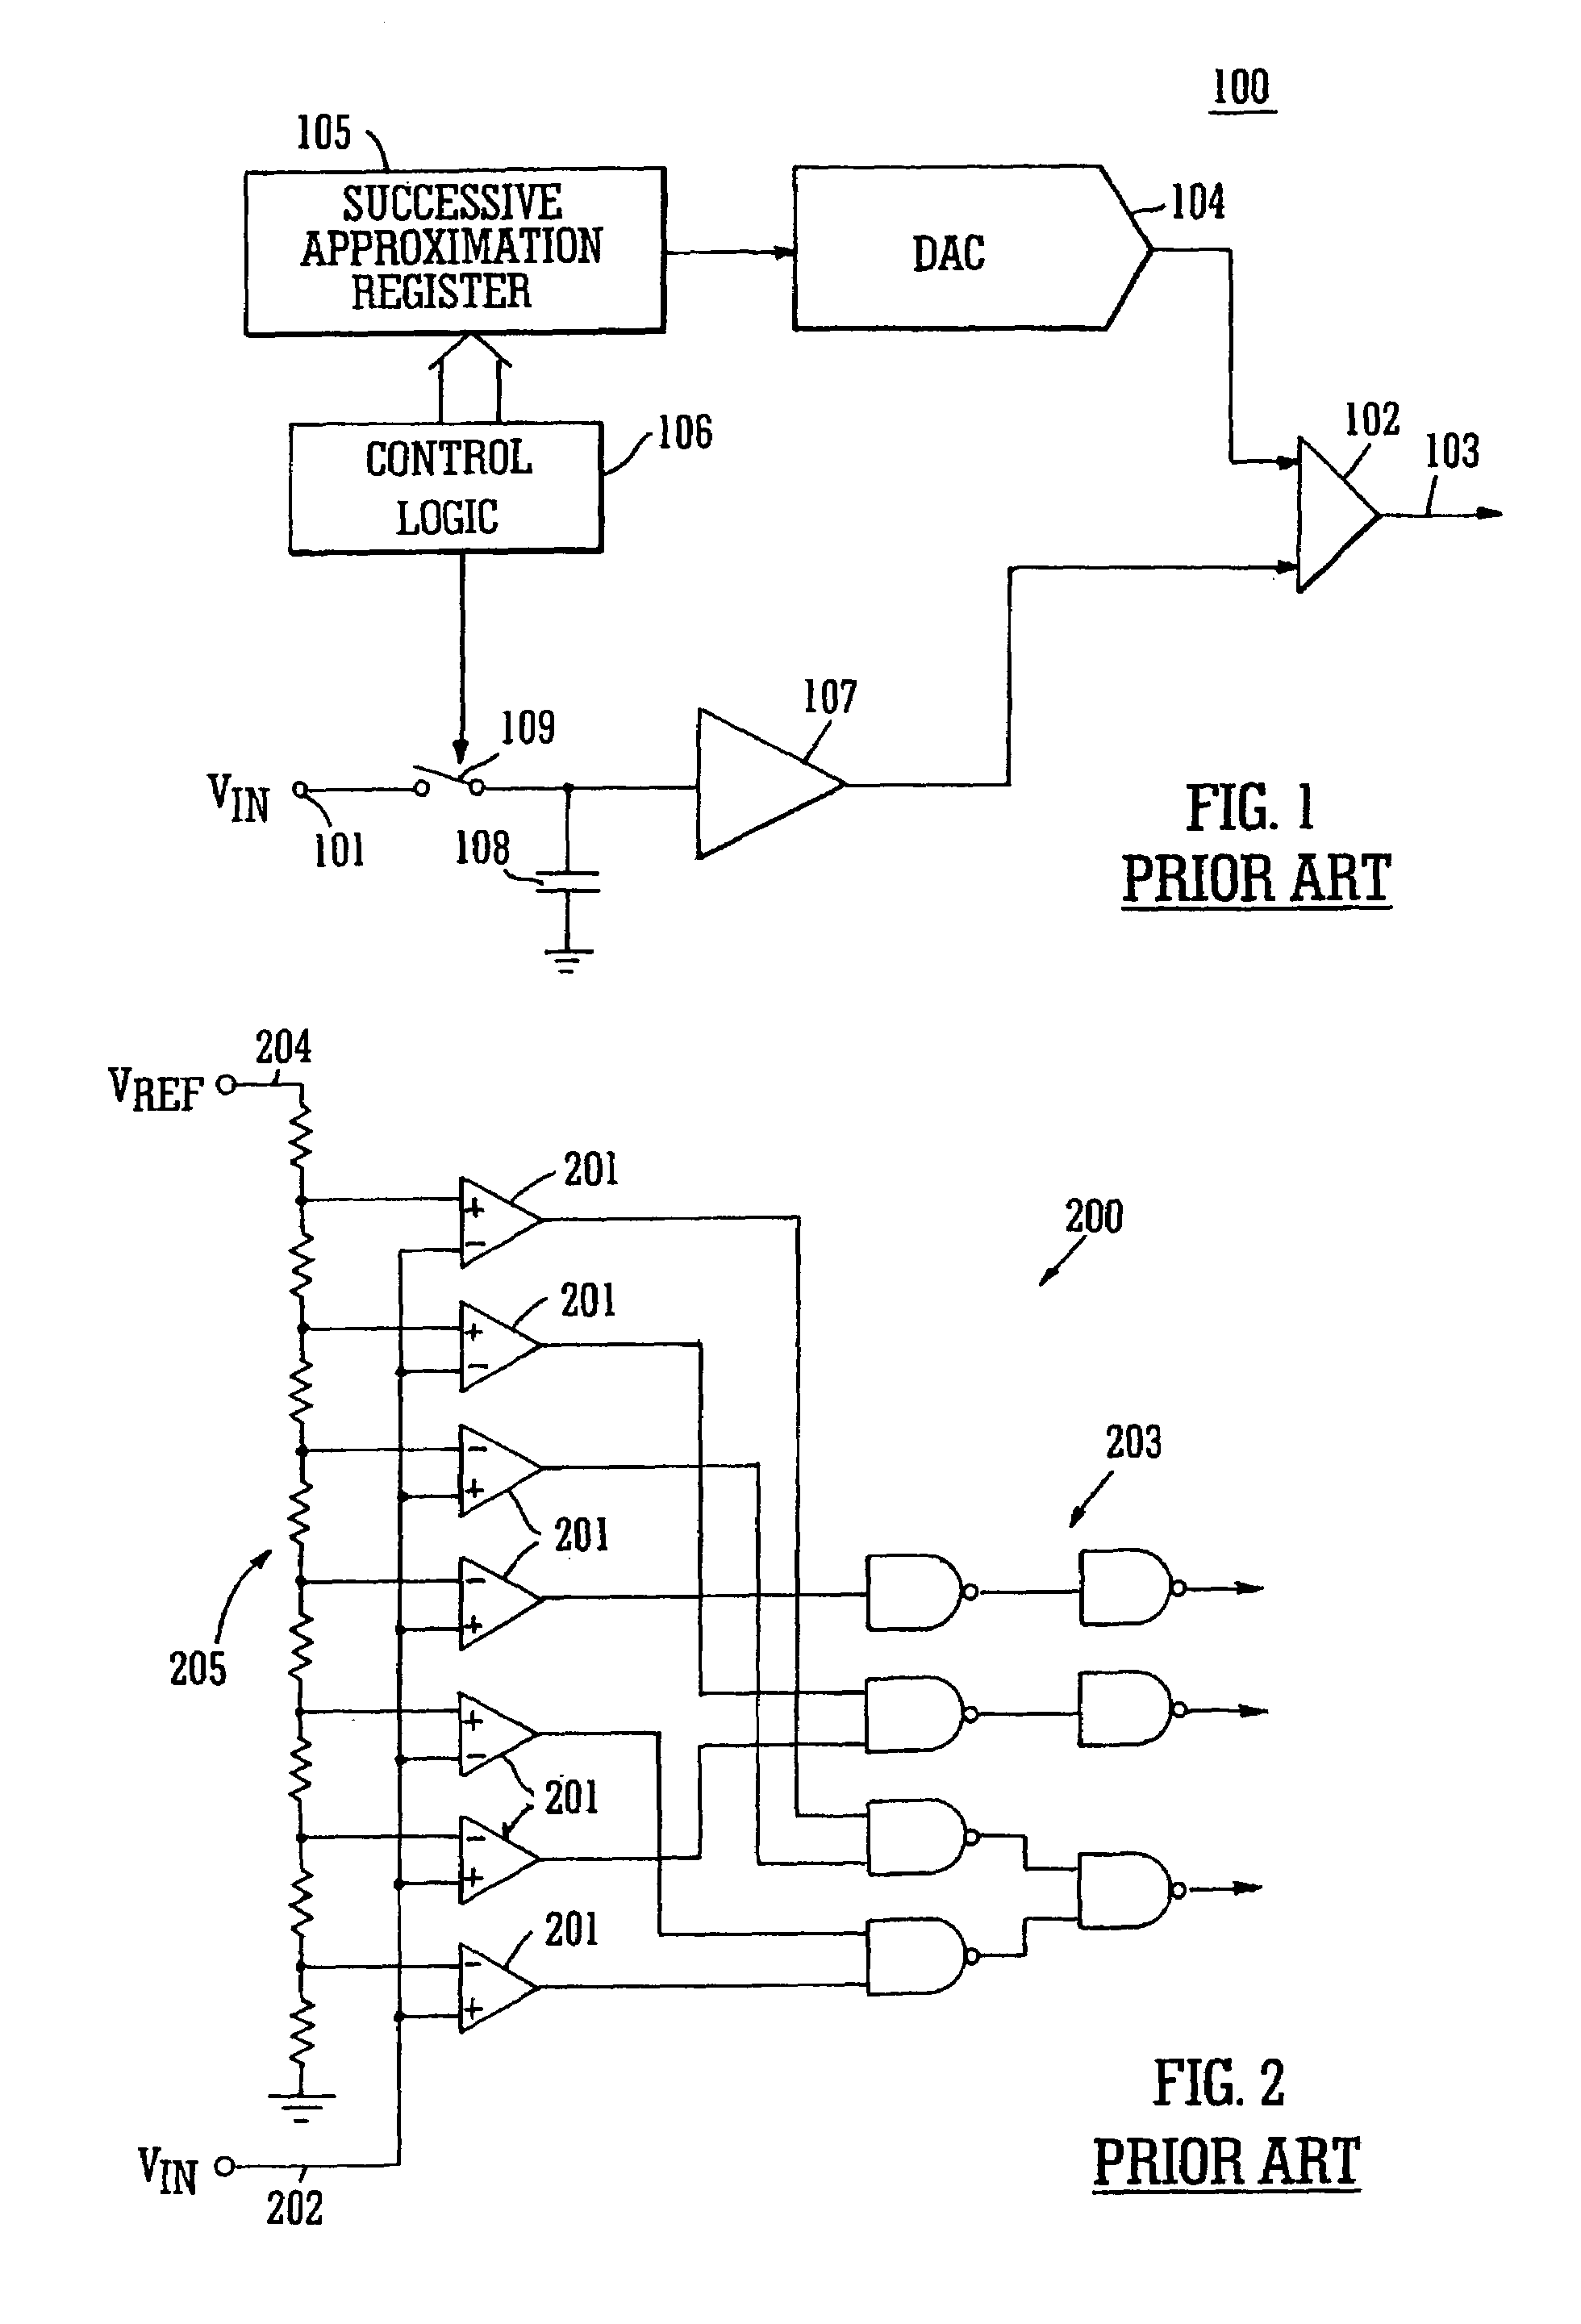 Successive approximation analog-to-digital converter with pre-loaded SAR registers